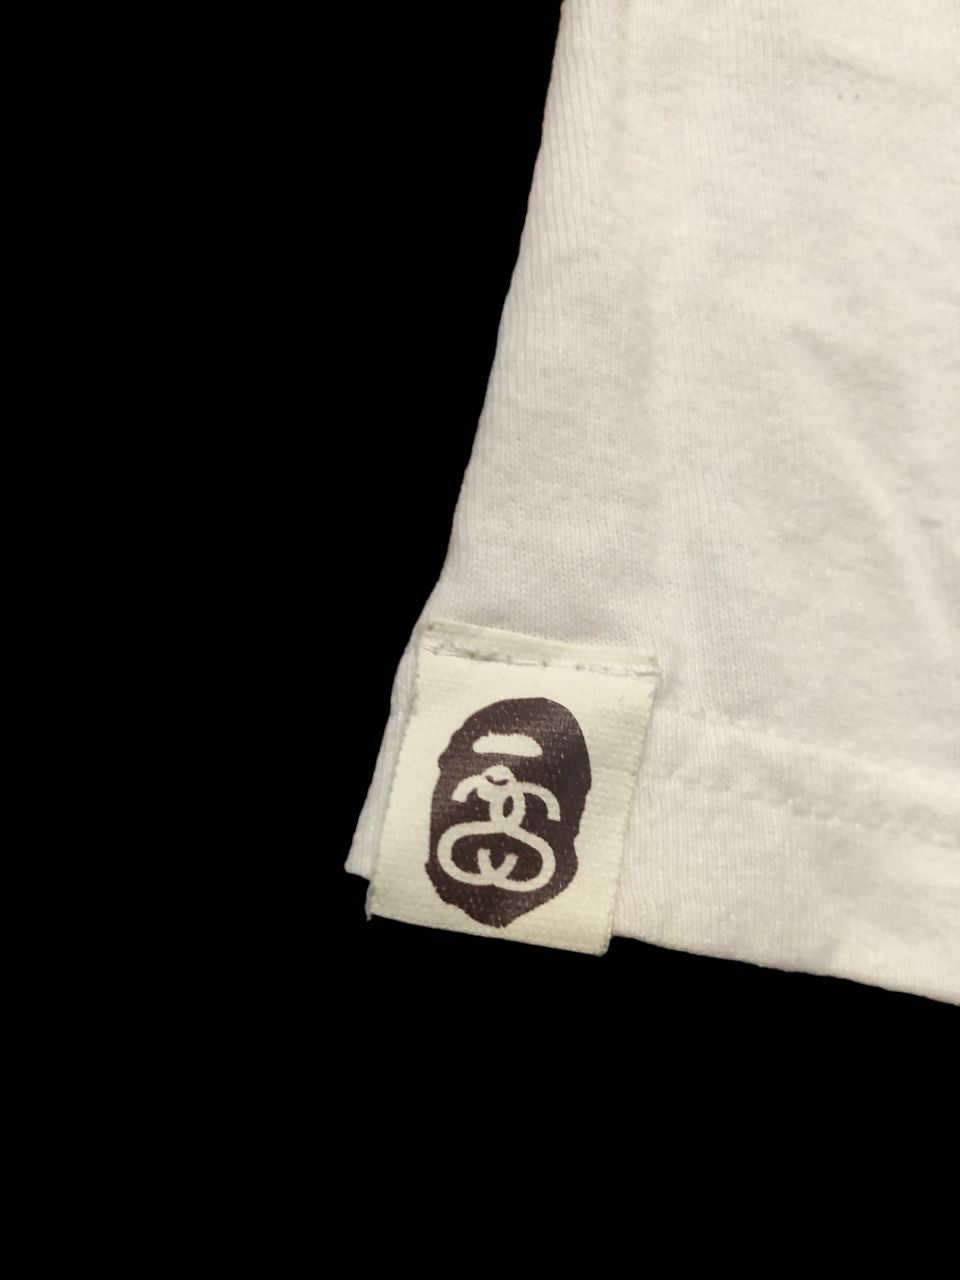 Rarestussy X Bape ILL Collabration/stussy Tour/streetwear/made in ...